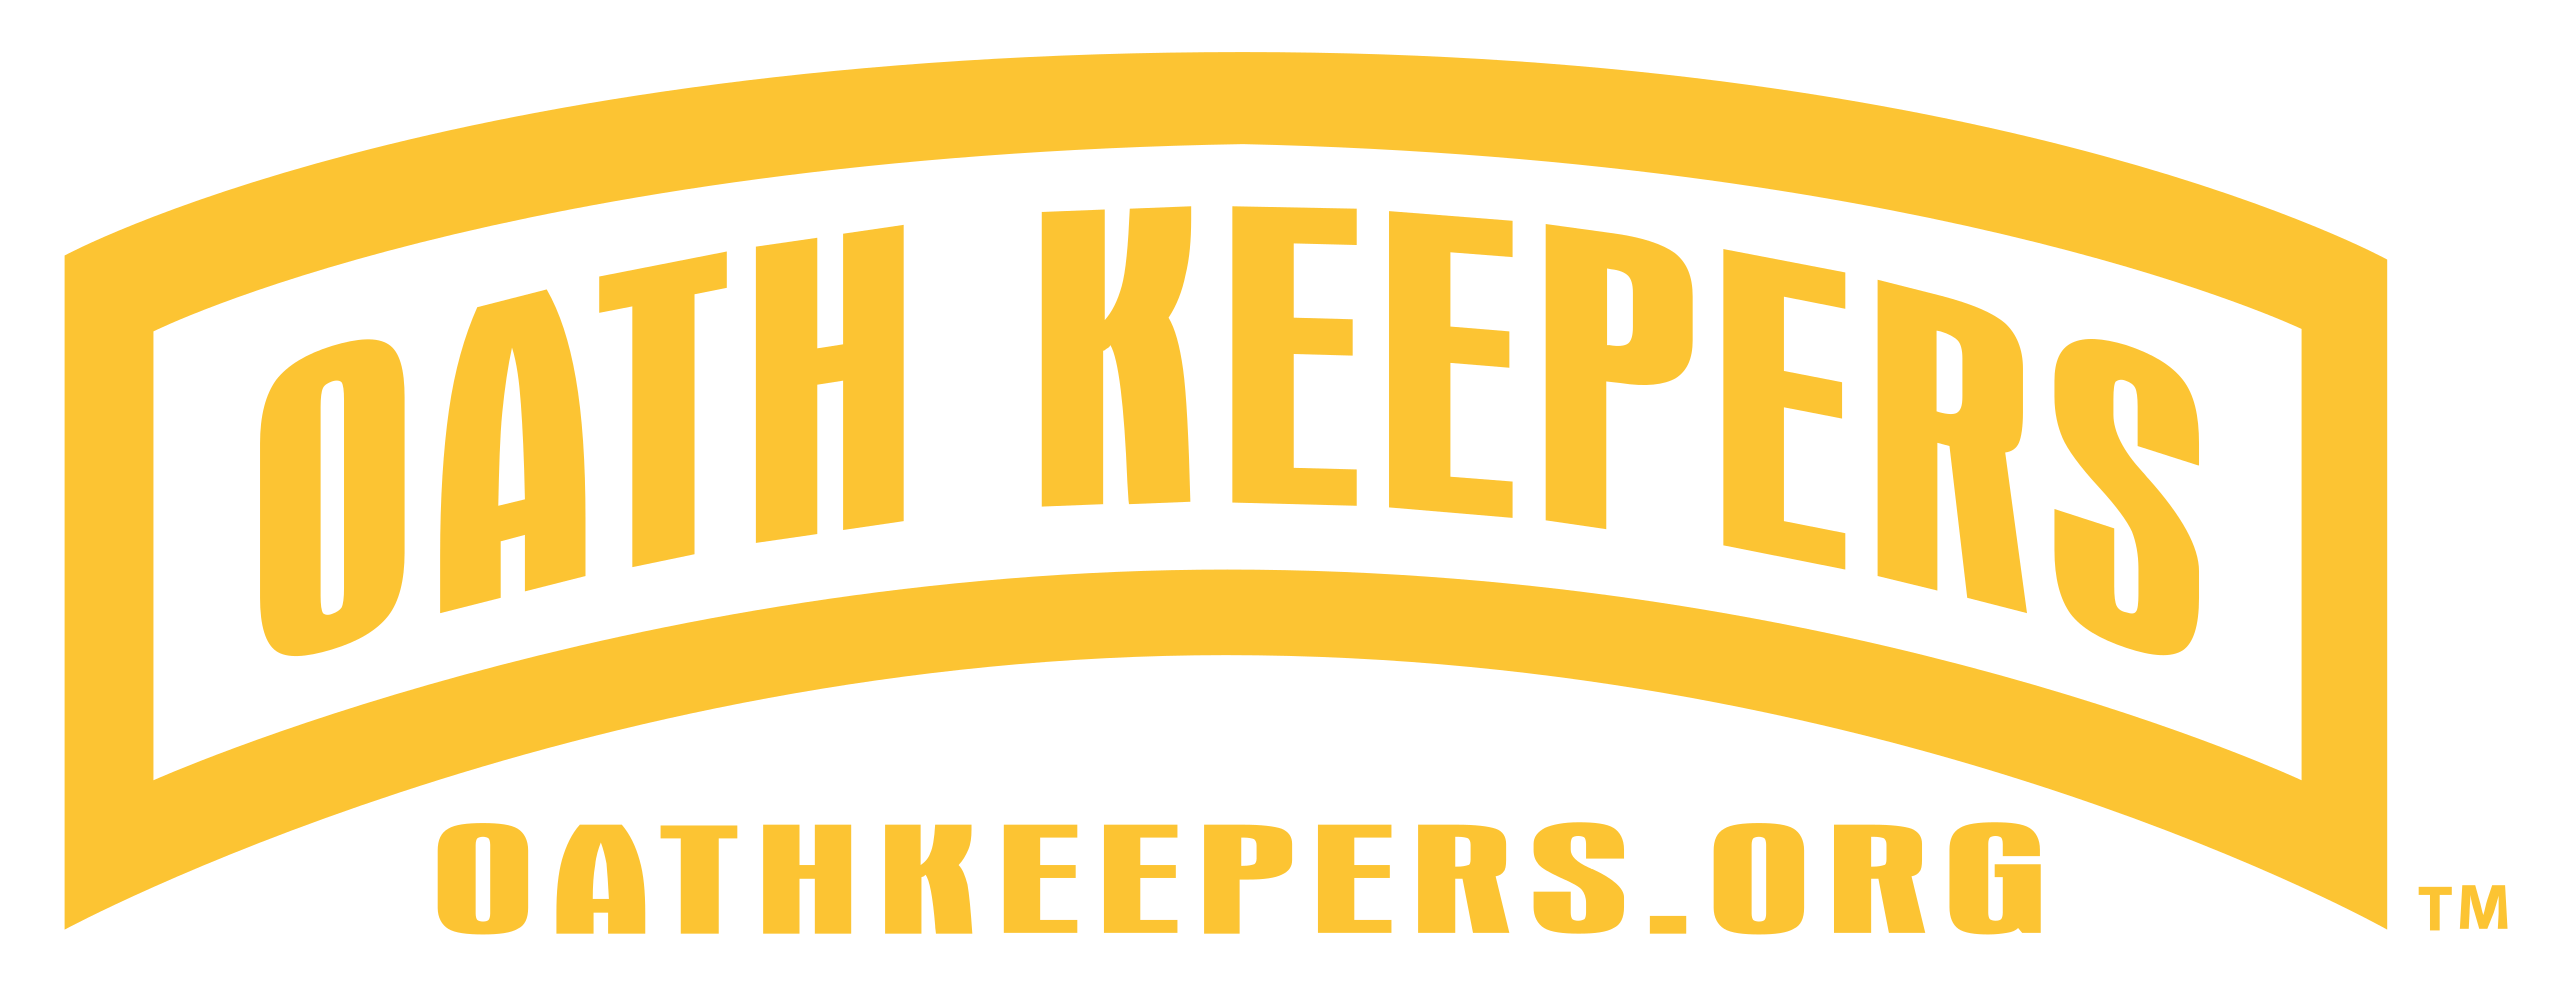 Oath Keepers logo.png